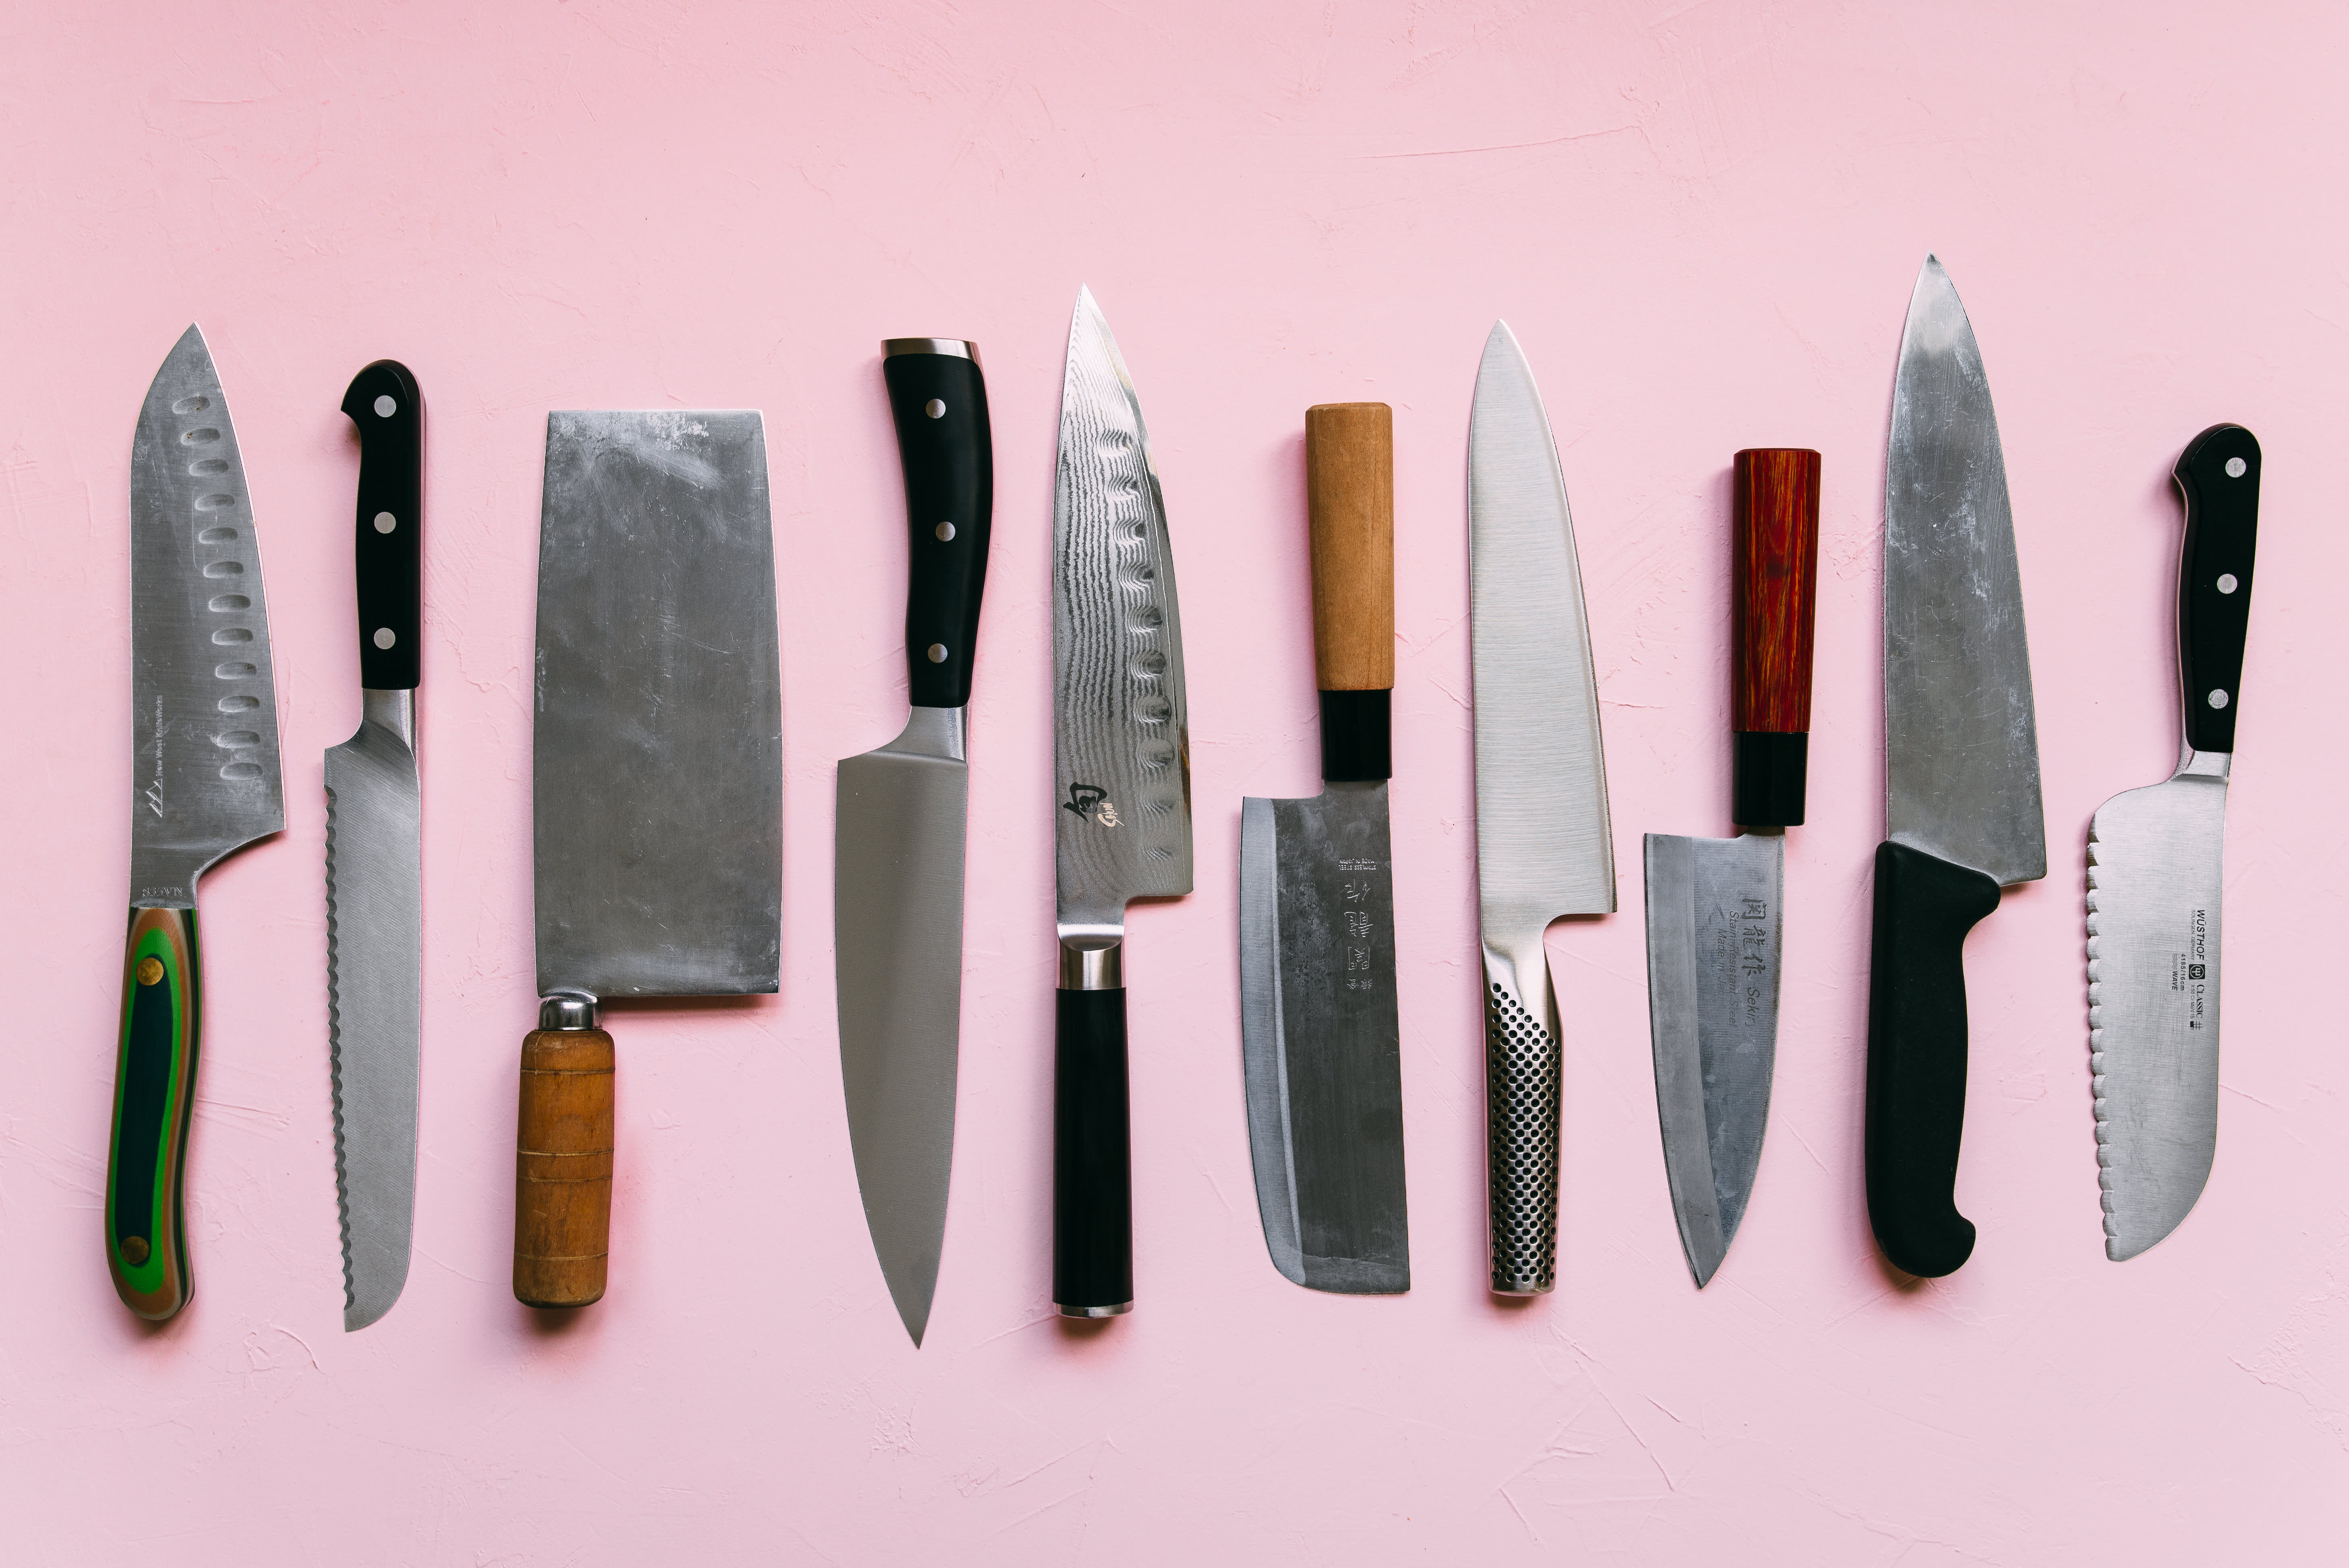 Key knives for your kitchen, and others to consider for your